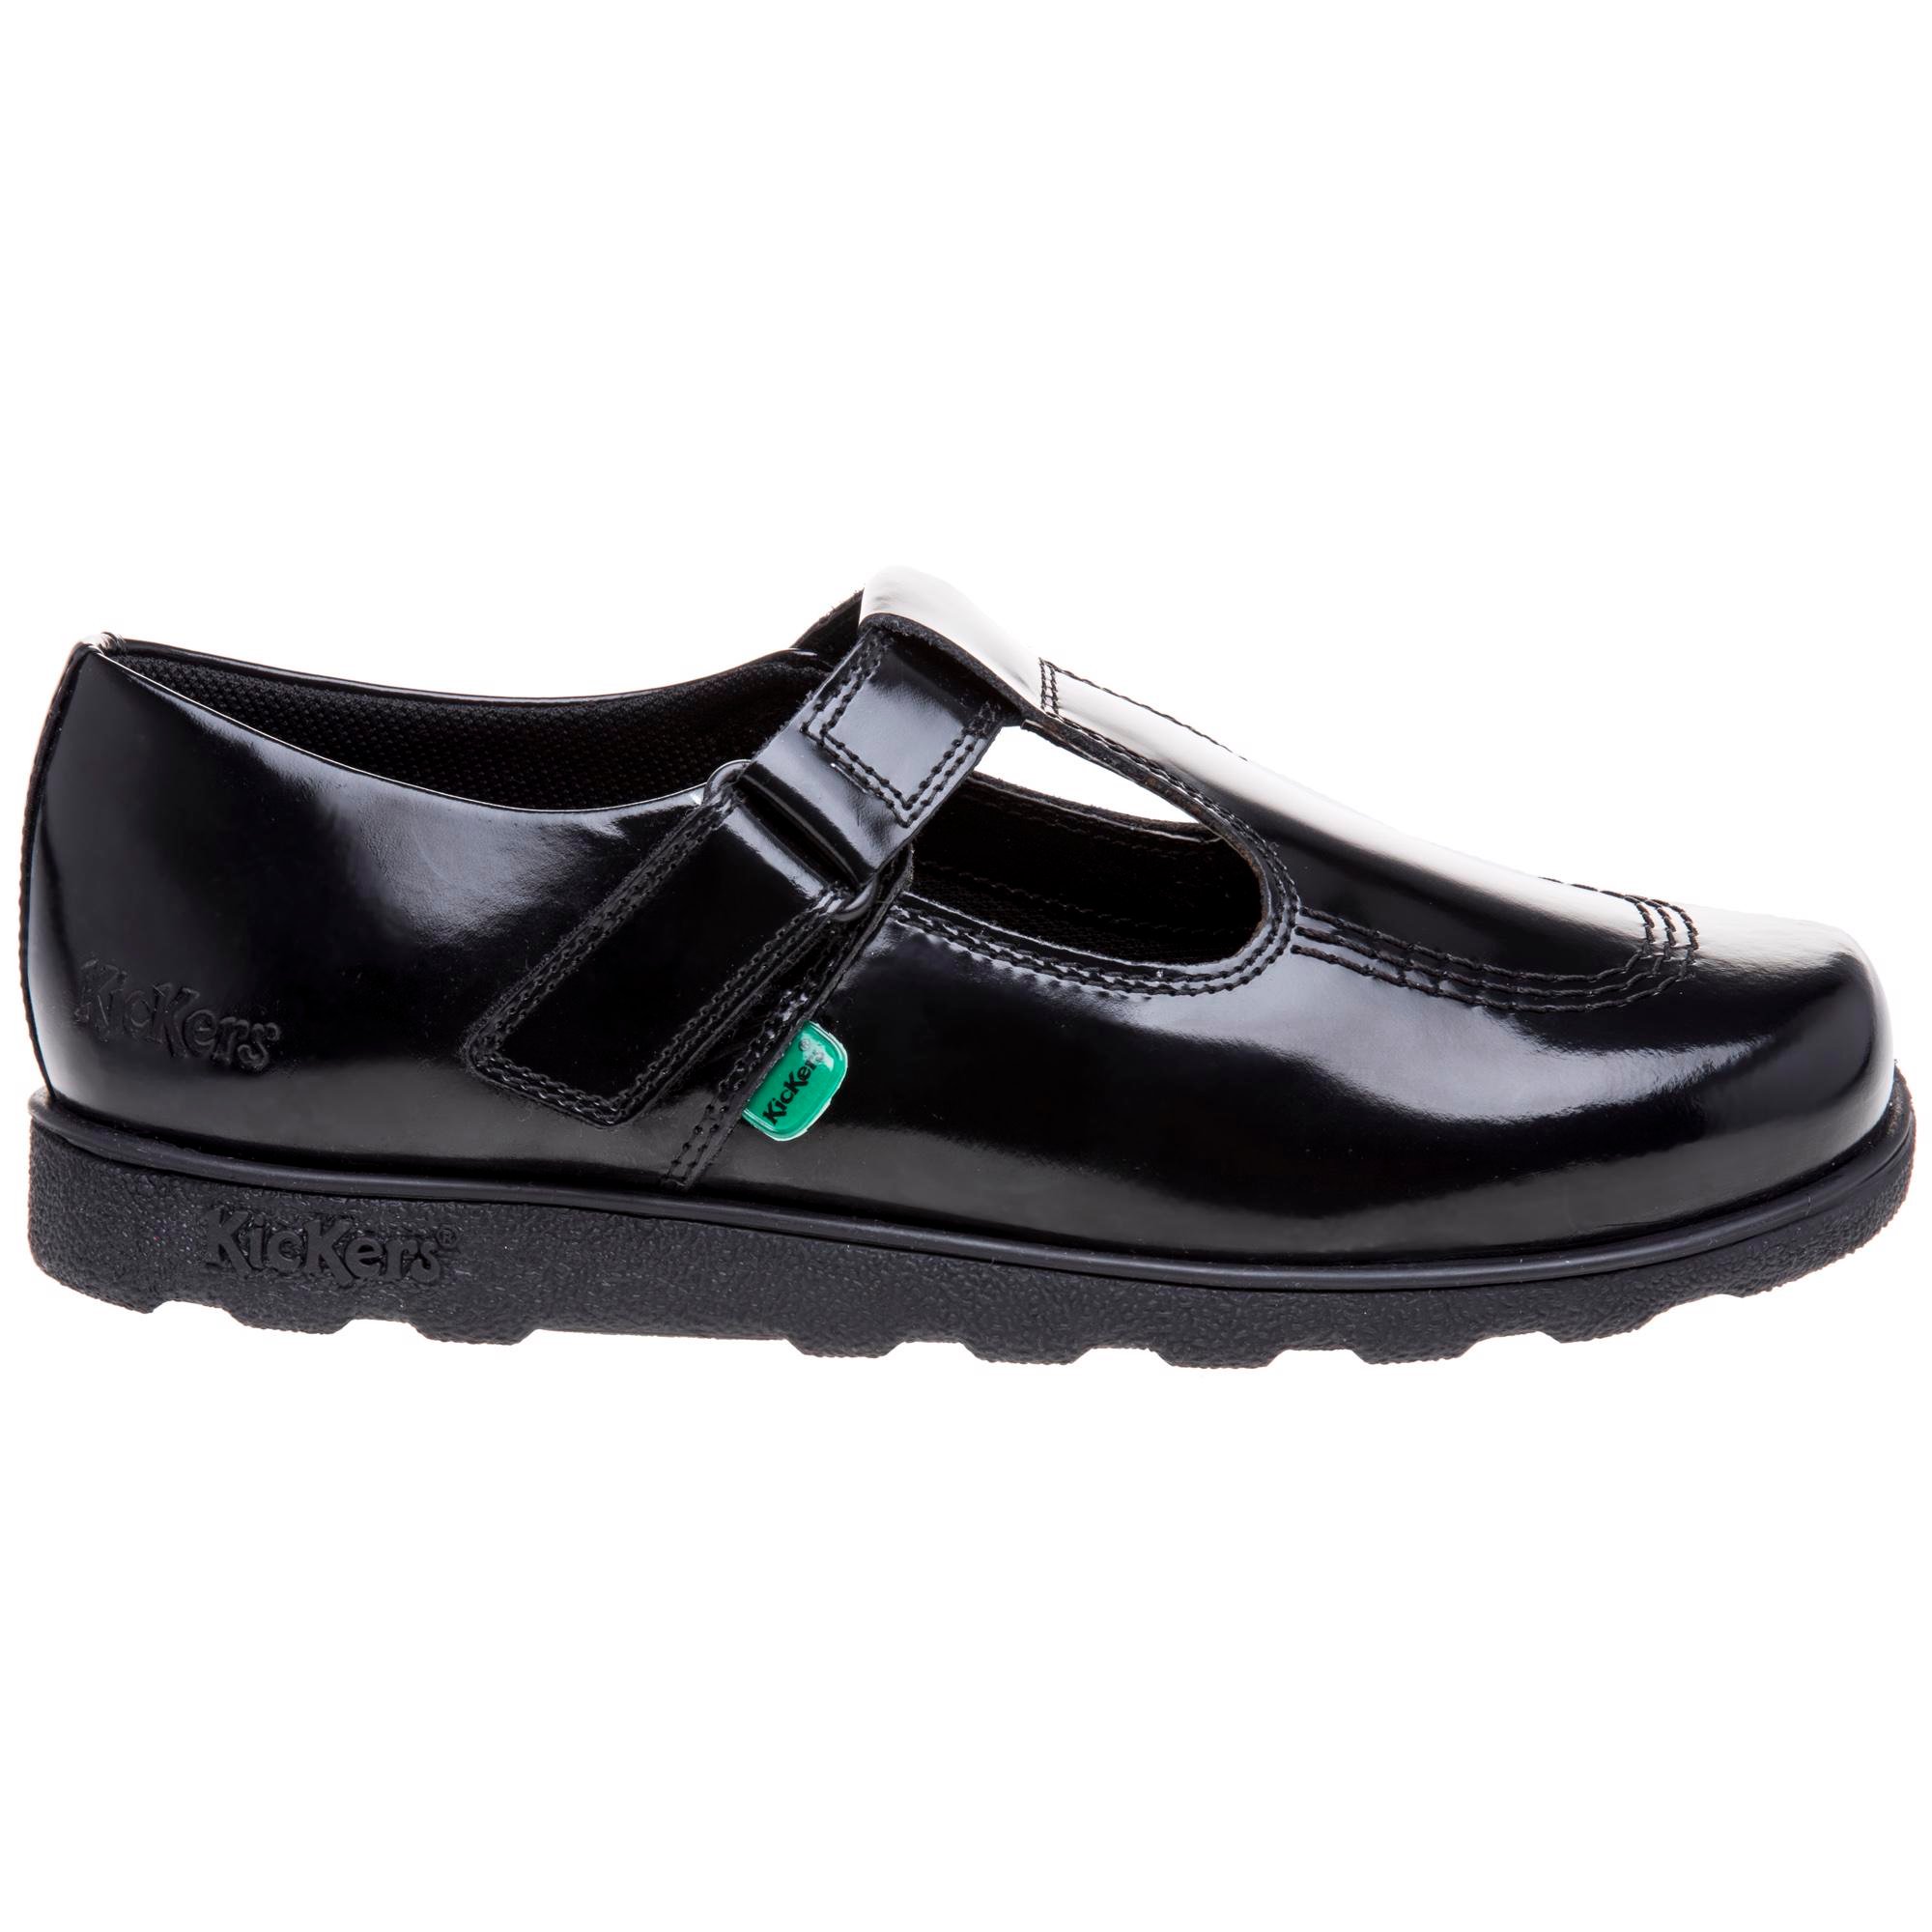 New Infants Kickers Black Fragma T-Bar Leather Shoes 